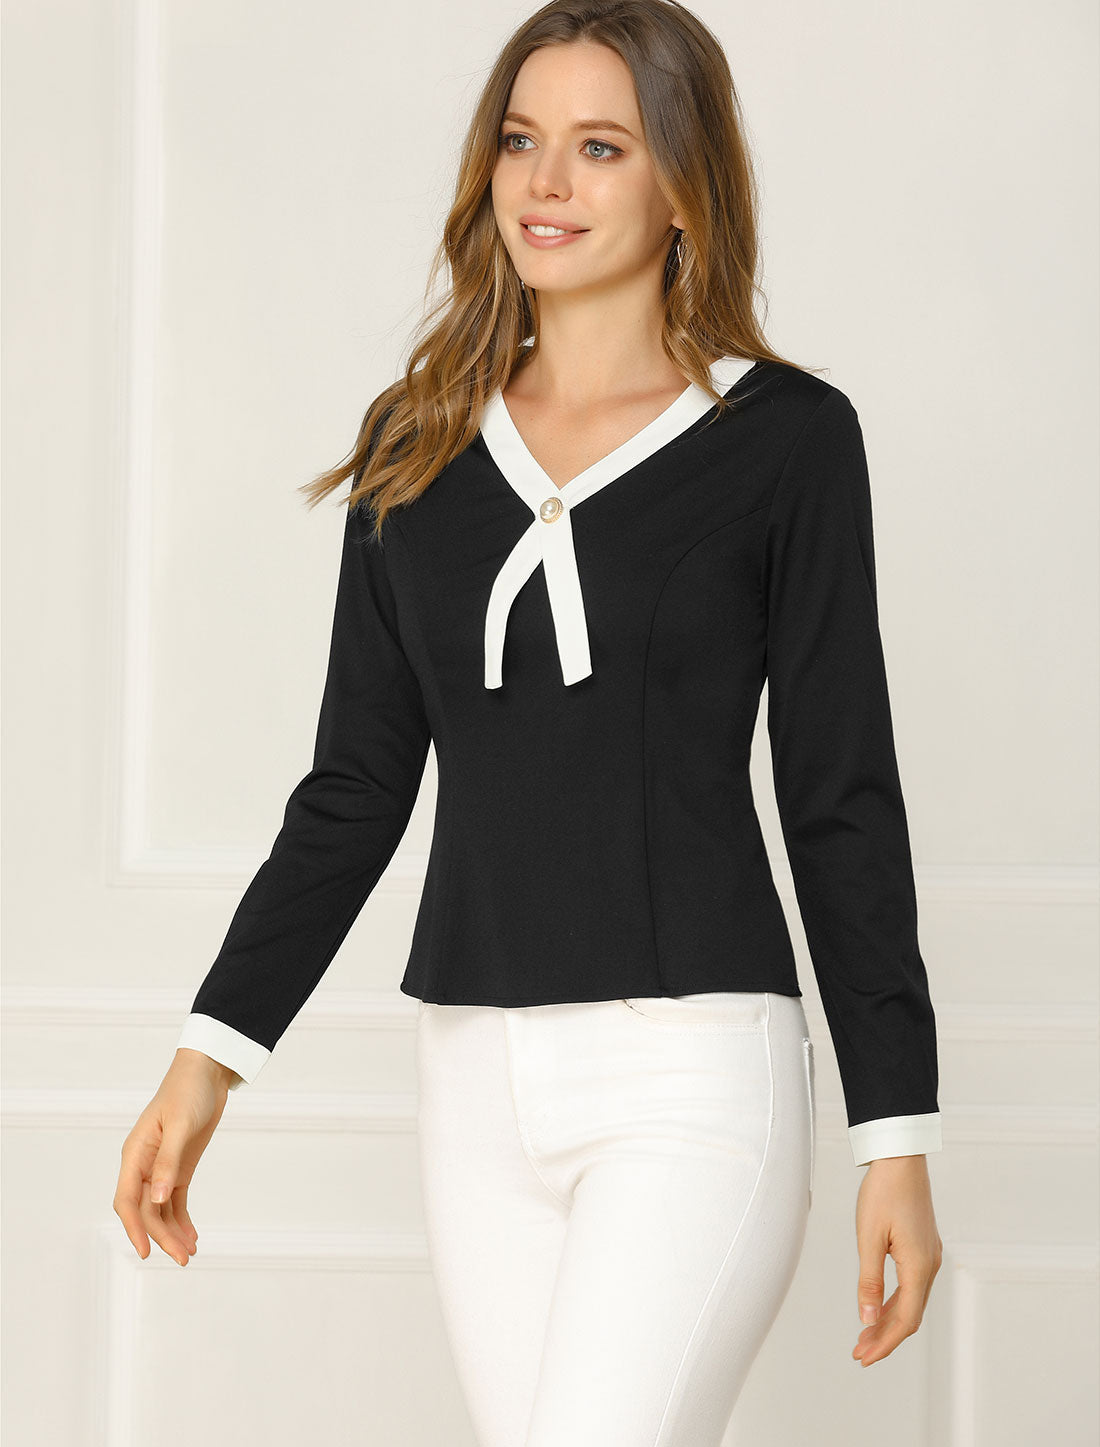 Allegra K Contrast Trim V Neck Long Sleeve Casual Office Blouse Top